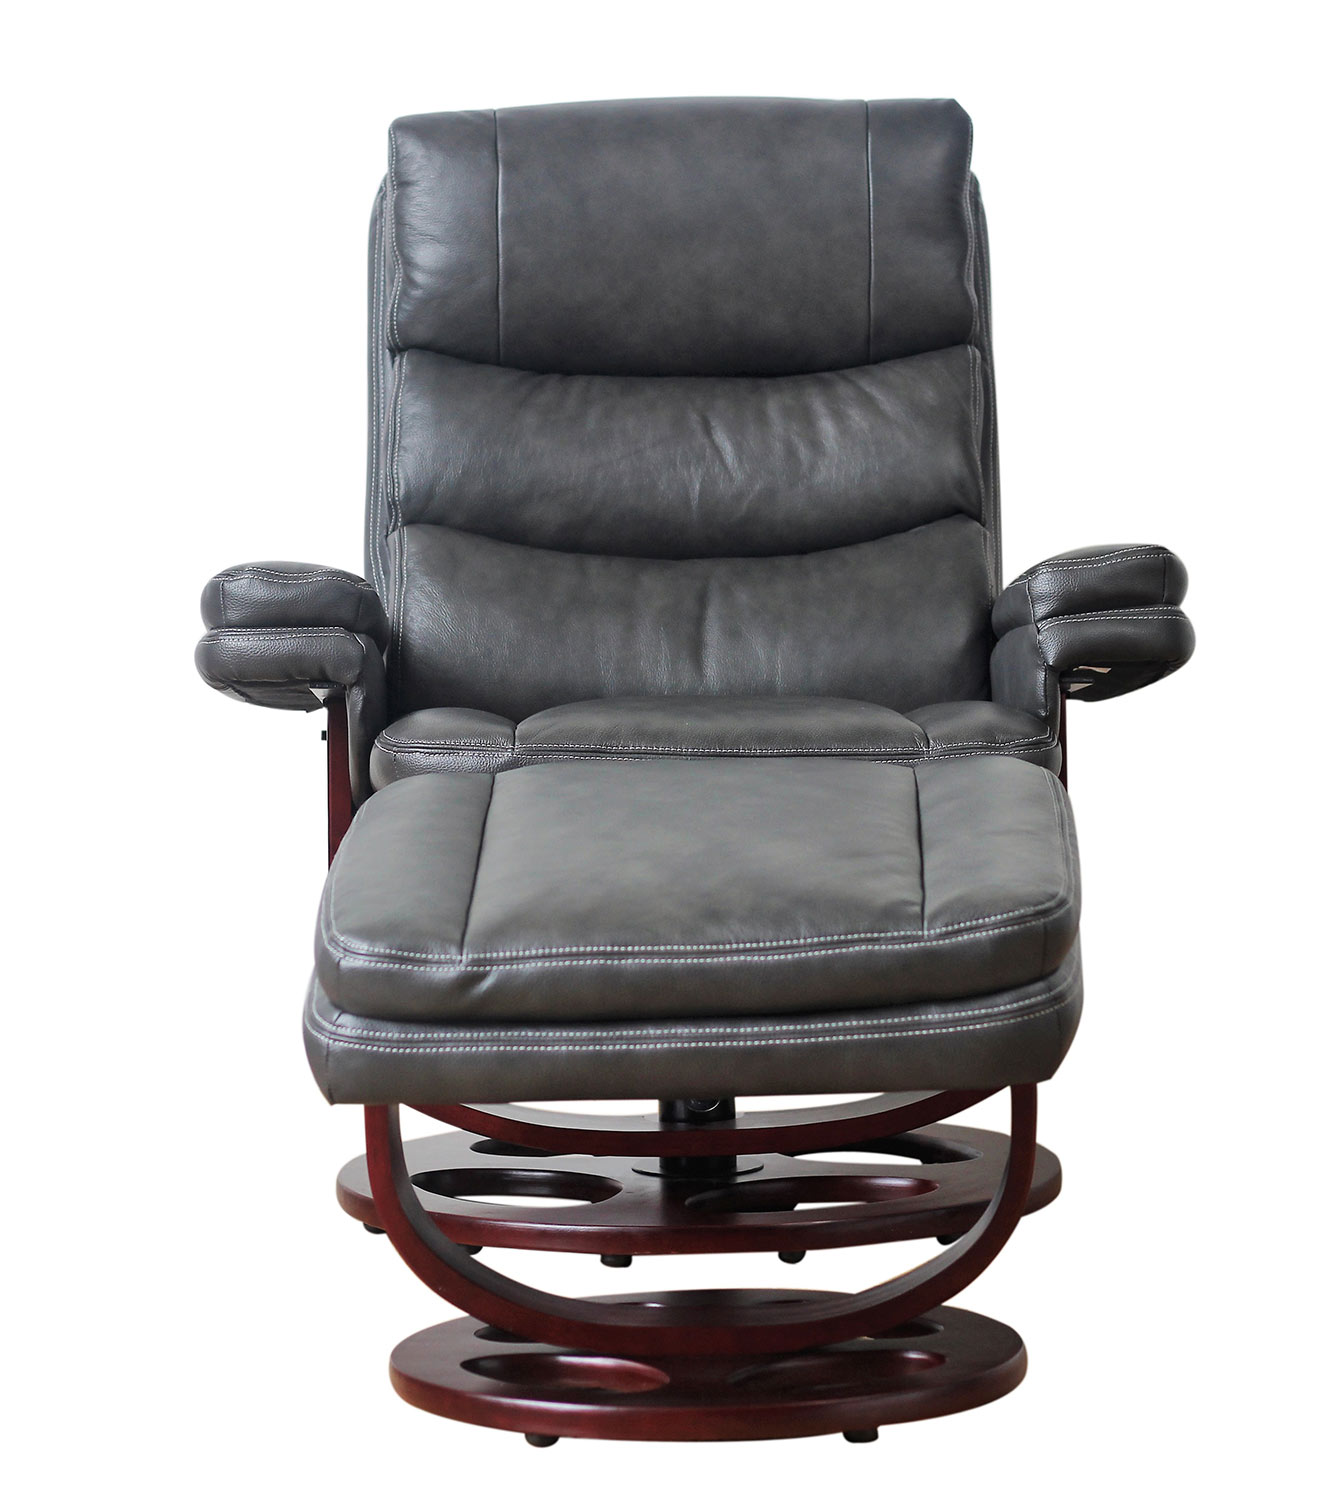 Barcalounger Bella Pedestal Recliner Chair and Ottoman - Chelsea Graphite/Leather Match